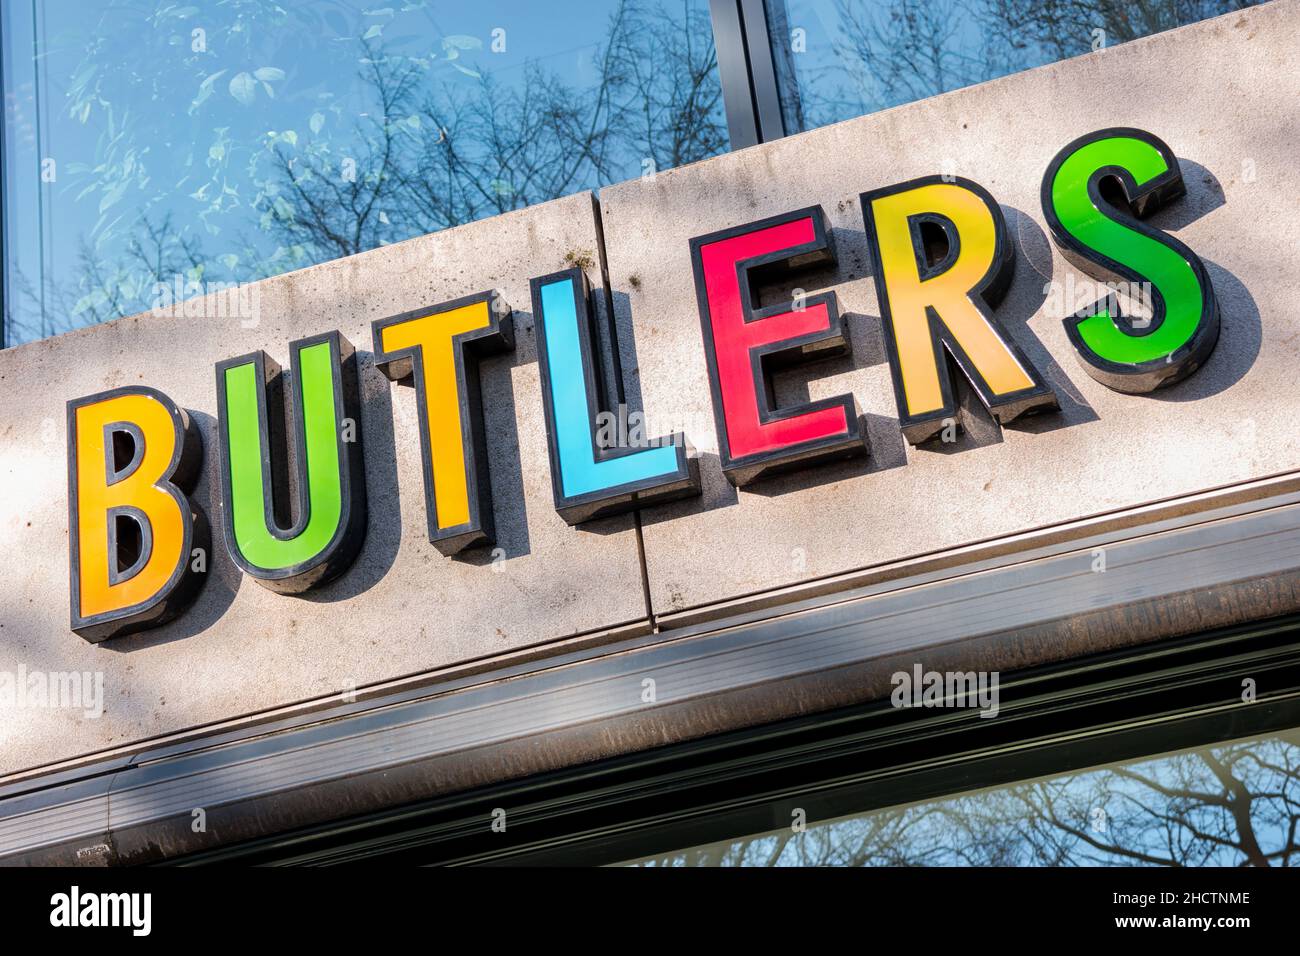 The logo of the brand "Butlers", Butlers is a home accessories store in  Aachen, Germany Stock Photo - Alamy